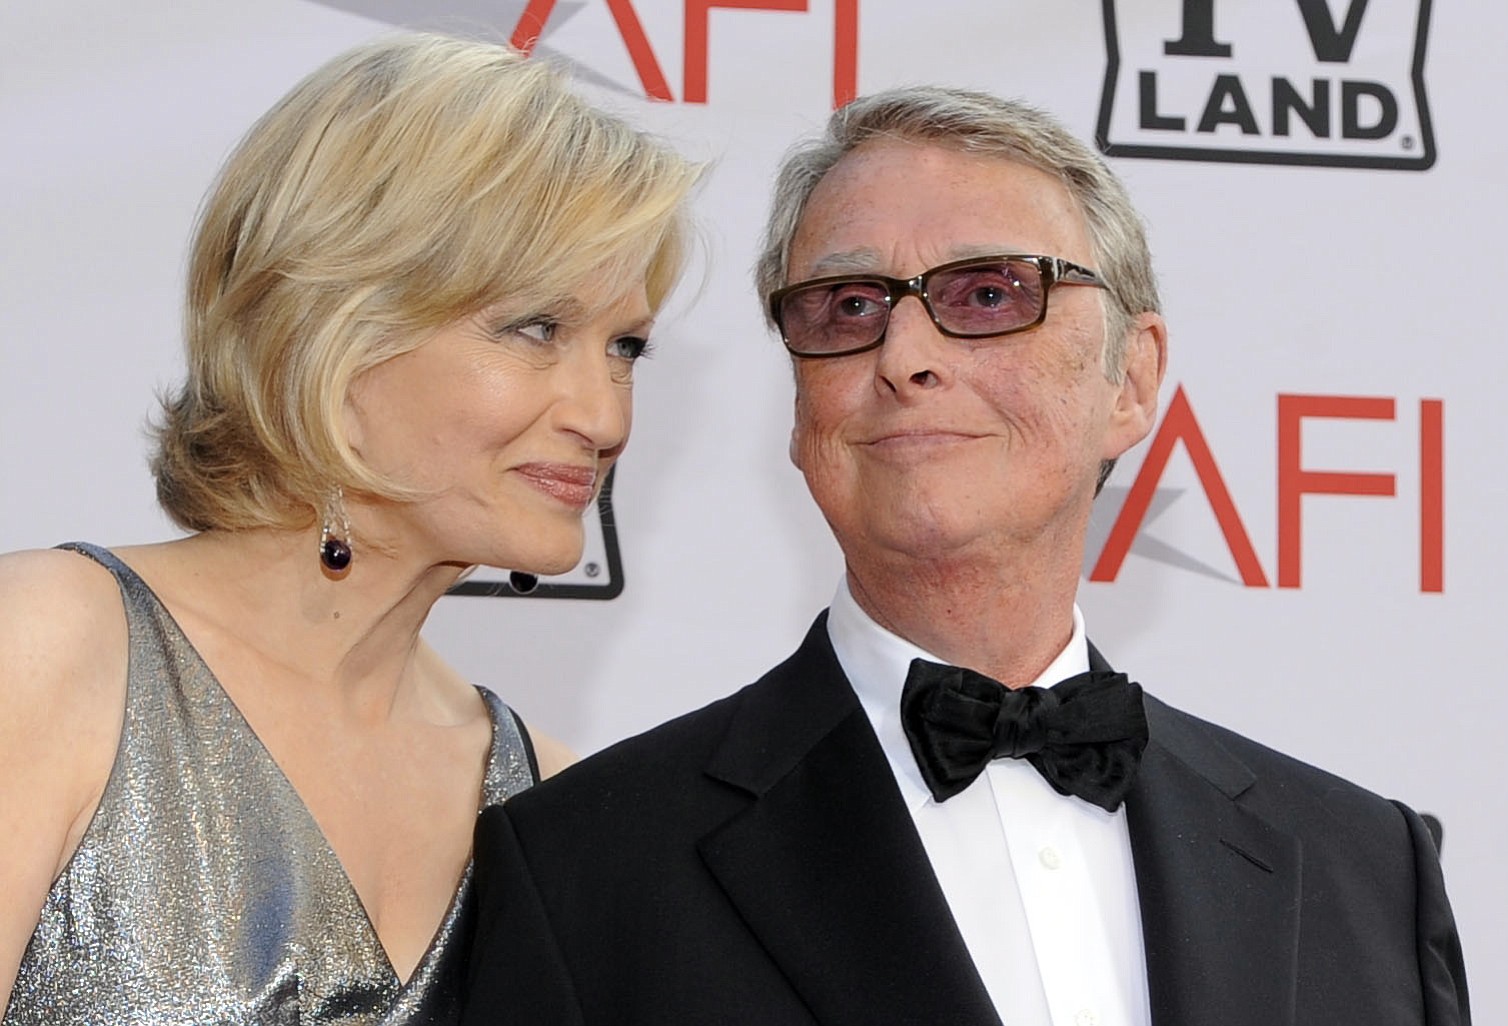 Journalist Diane Sawyer and director Mike Nichols arrive at the AFI Lifetime Achievement Awards honoring Mike Nichols, at Sony Pictures Studios in 2010 in Culver City, Calif. ABC News confirms director Mike Nichols and husband of Diane Sawyer died Wednesday evening Nov. 19, 2014.